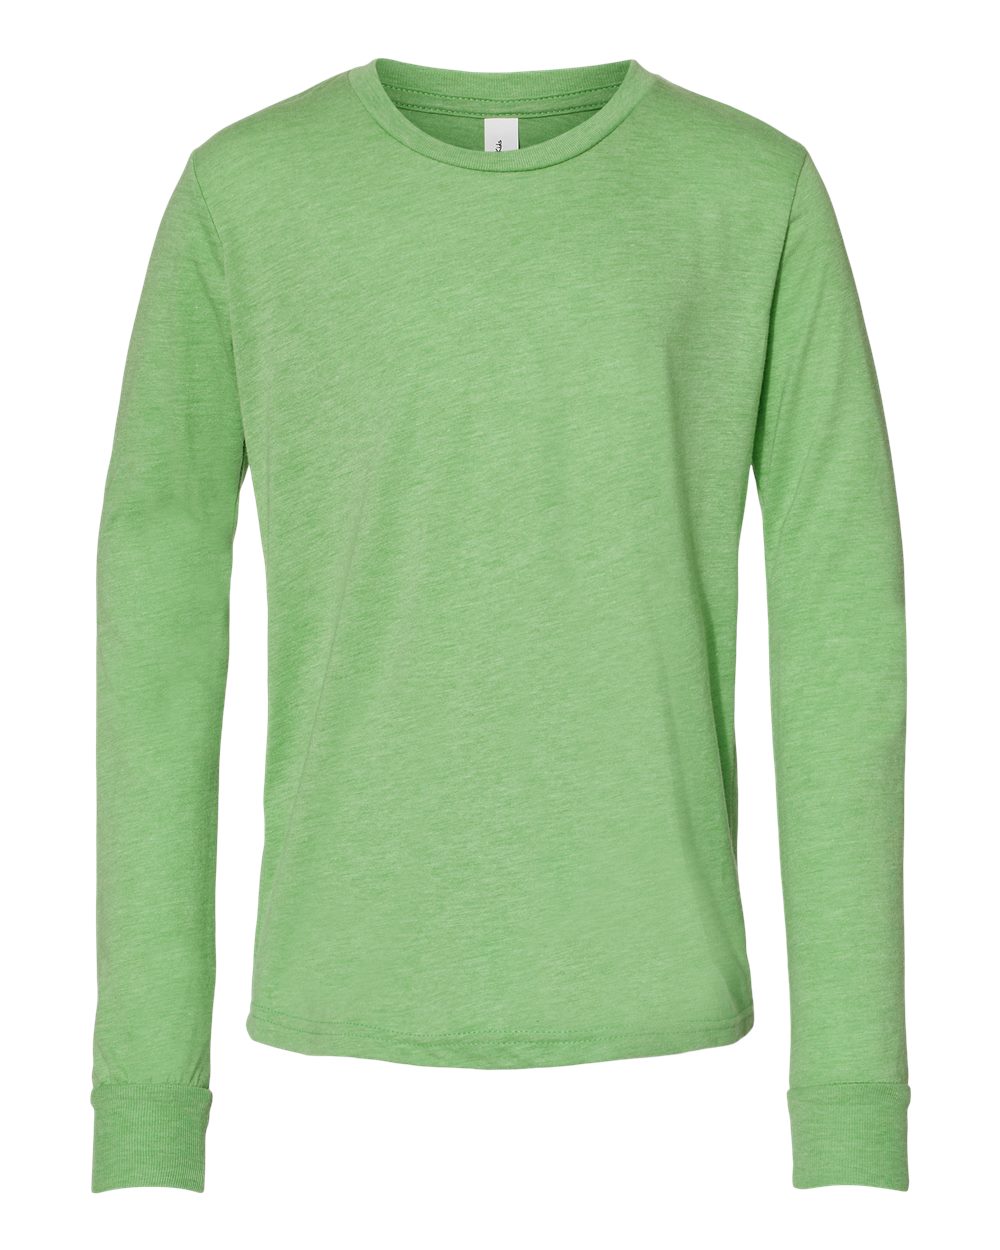 bella+canvas youth long sleeve tee green triblend